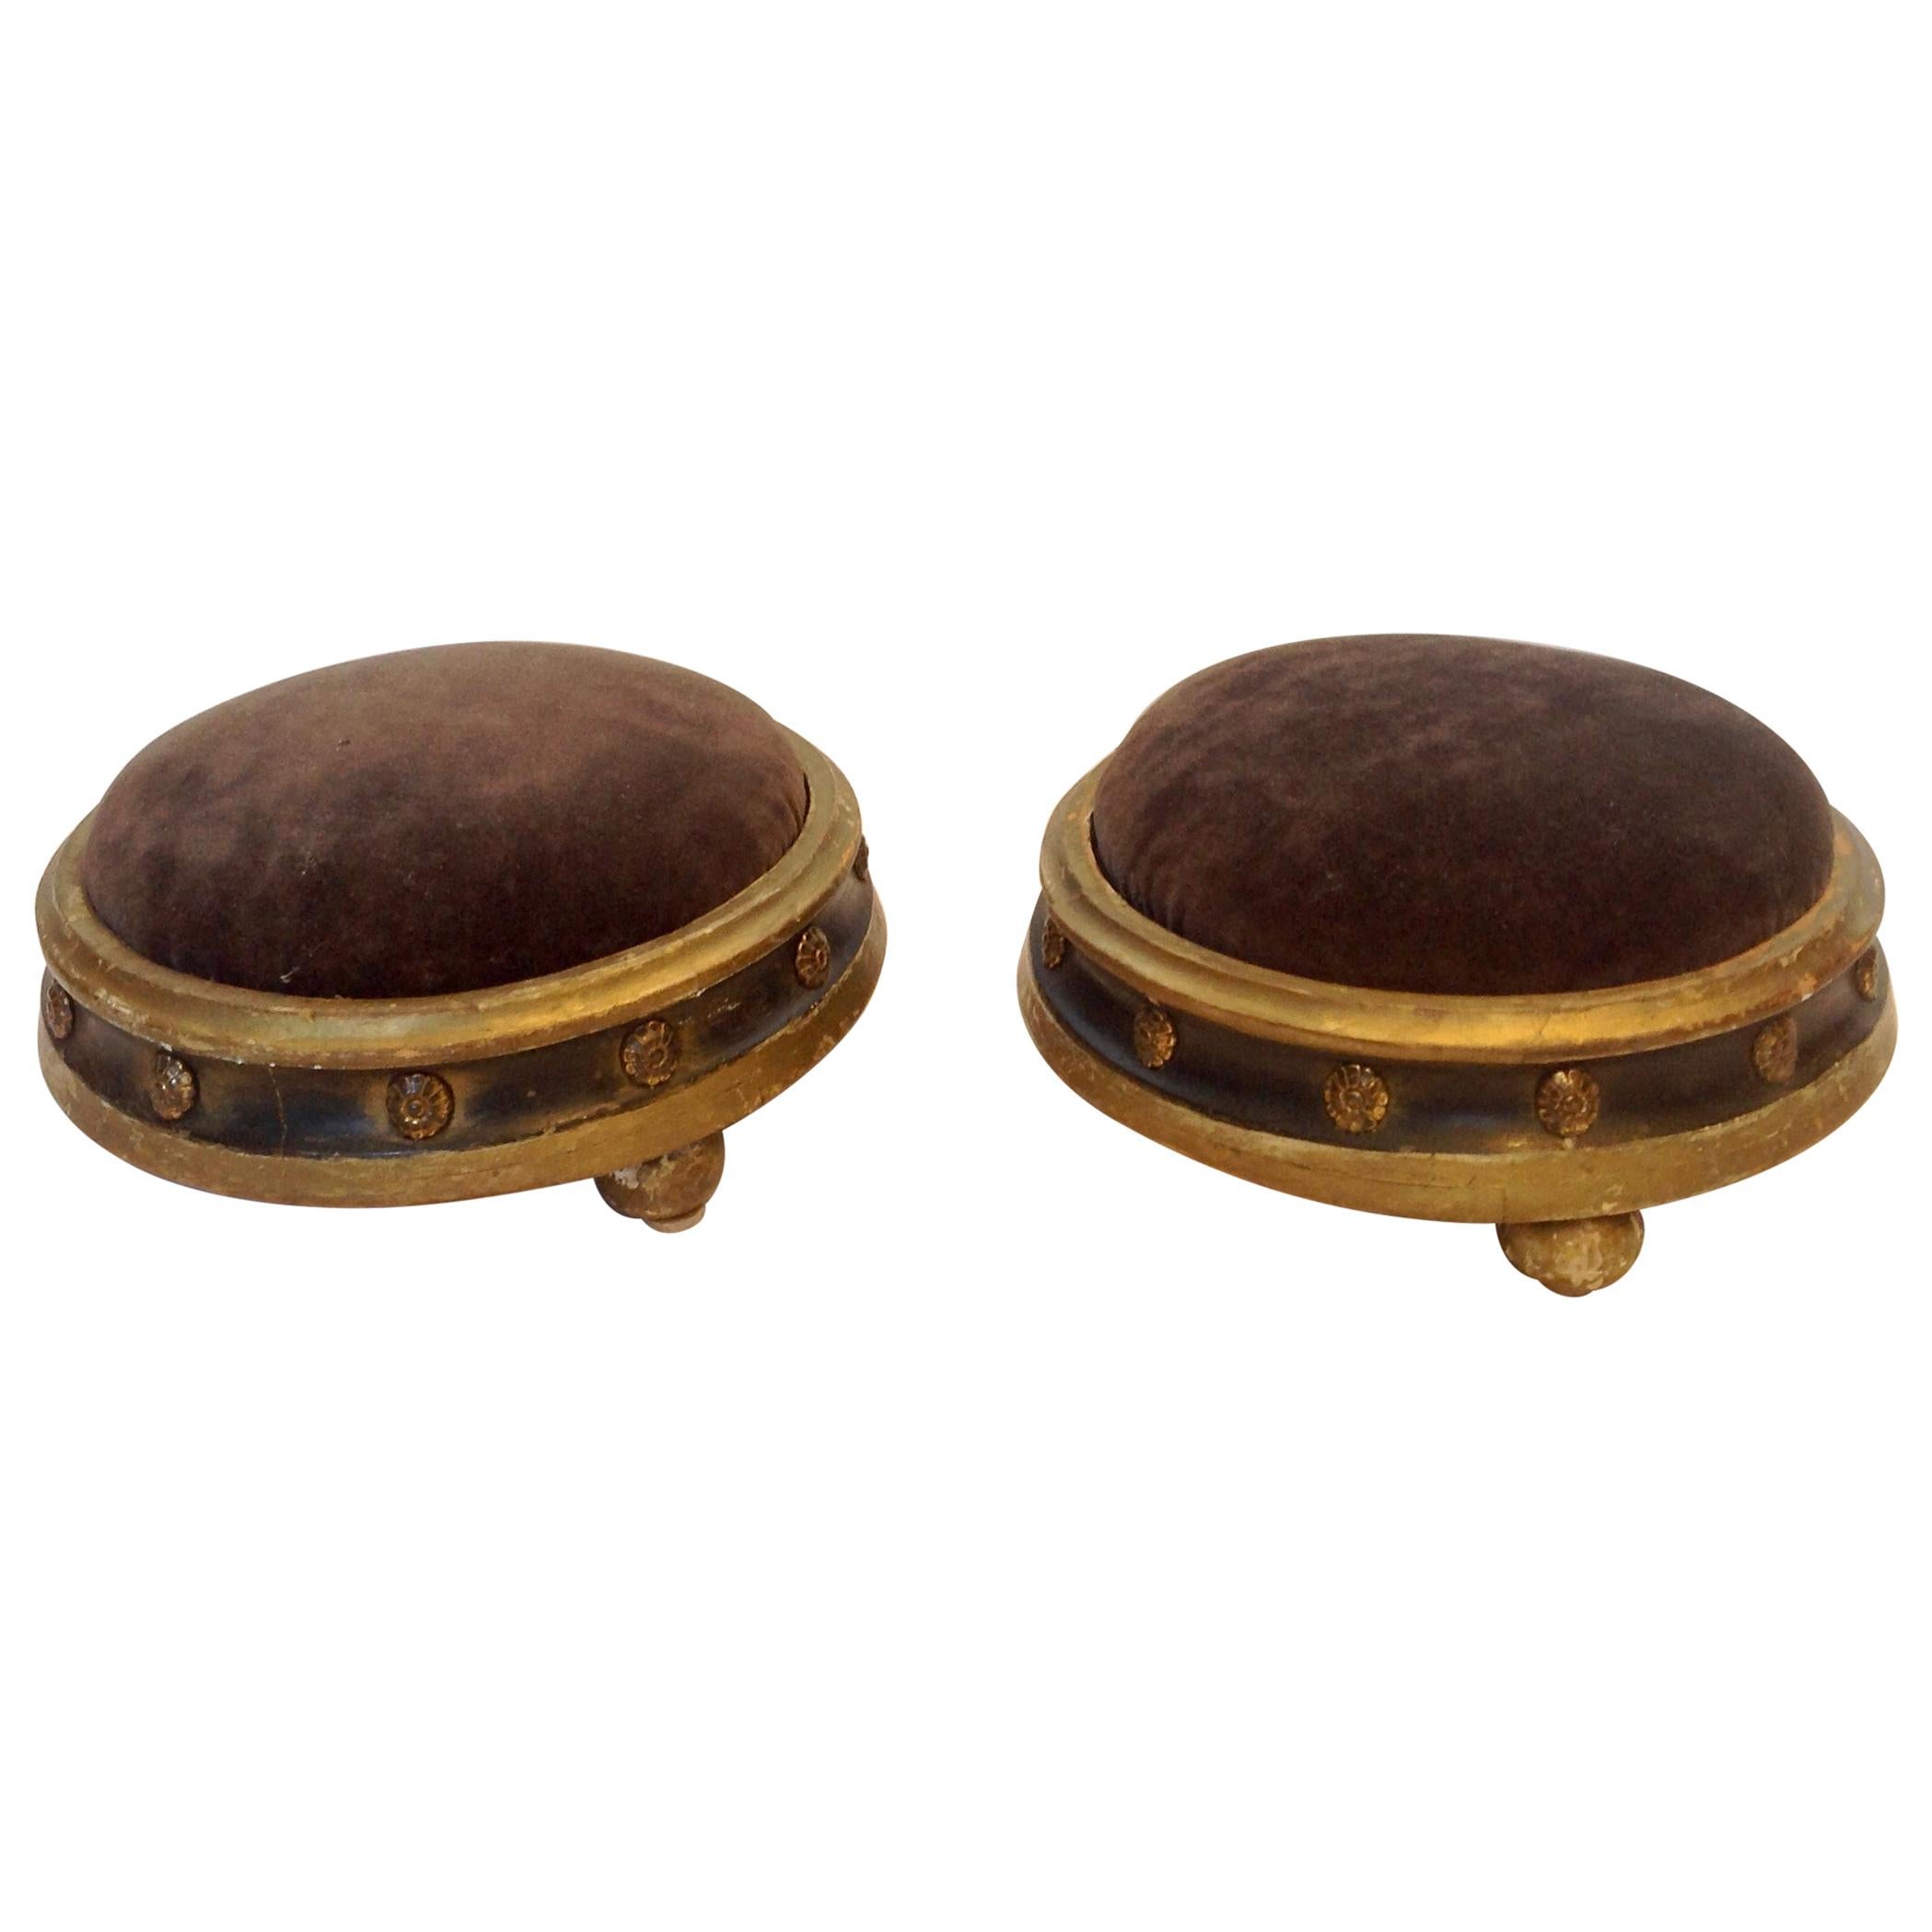 Pair of 19th Century French Pouf Form Footstools